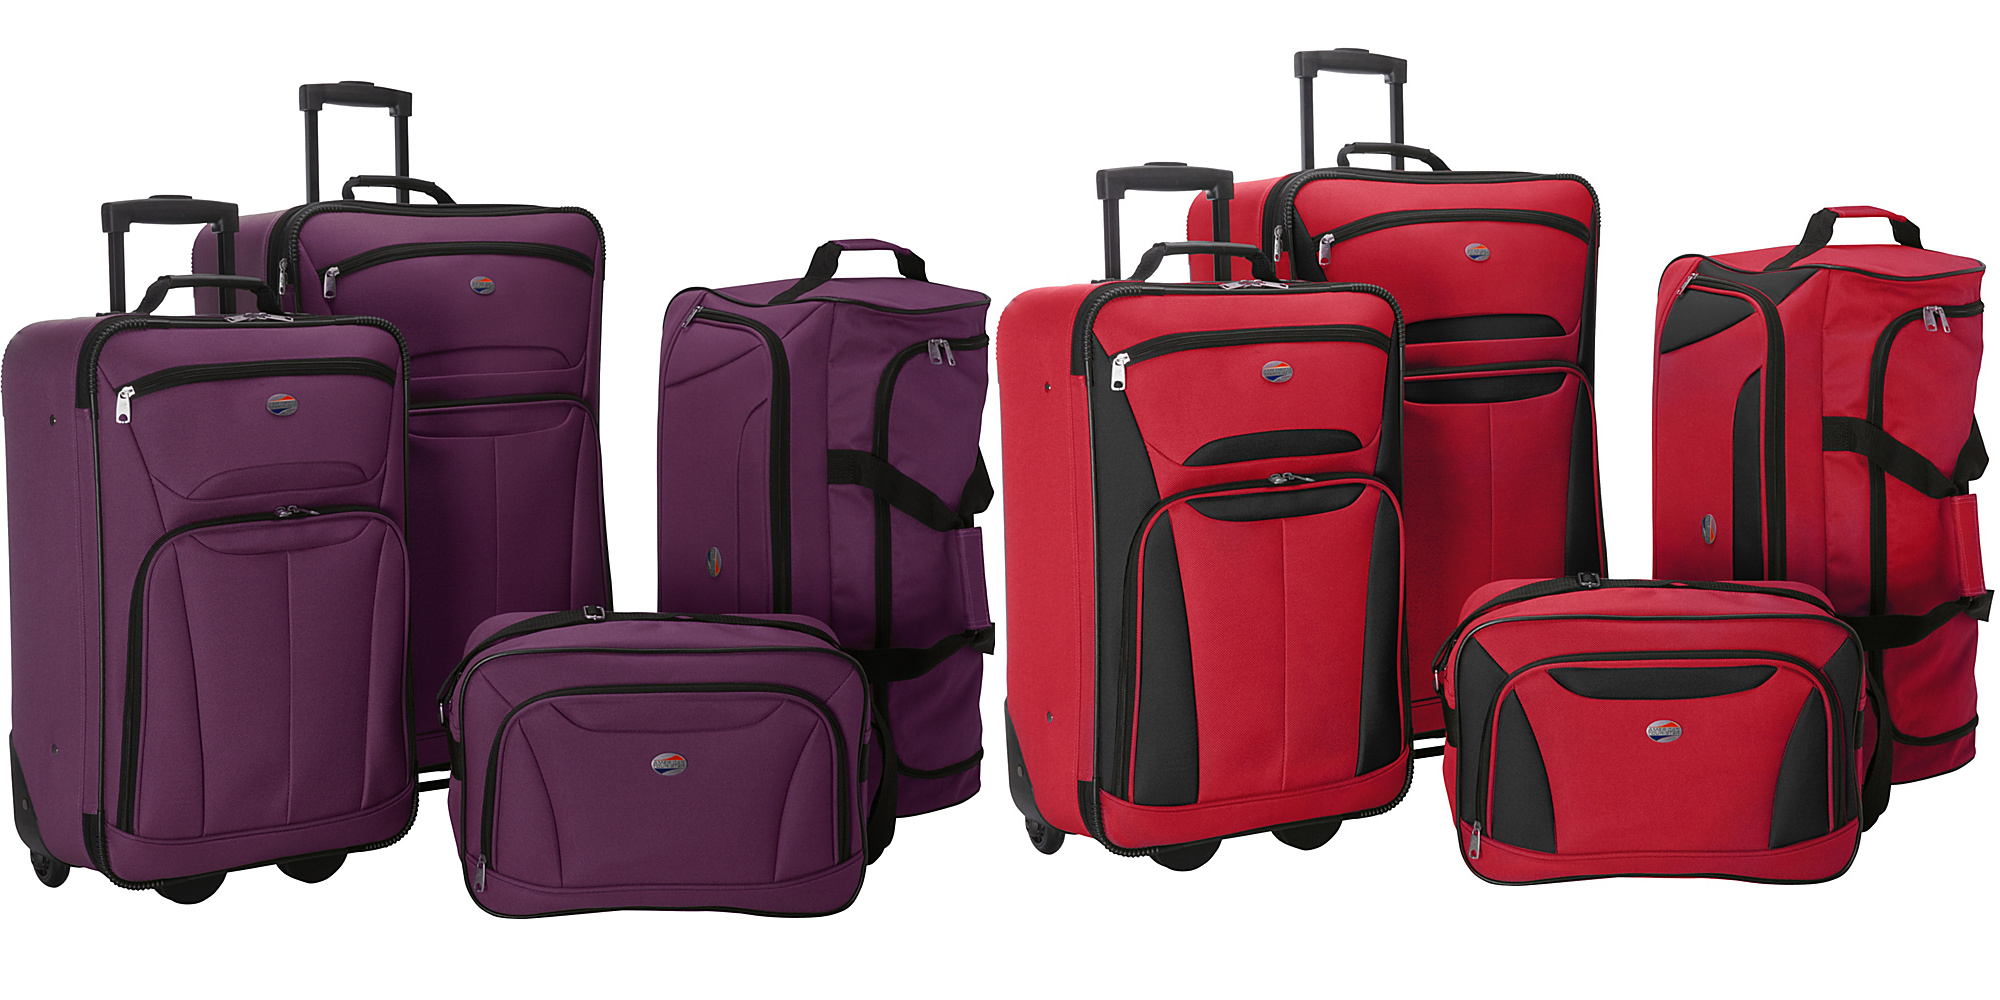 American Tourister 4-pc Luggage Set in Red or Purple Only $55.99!!